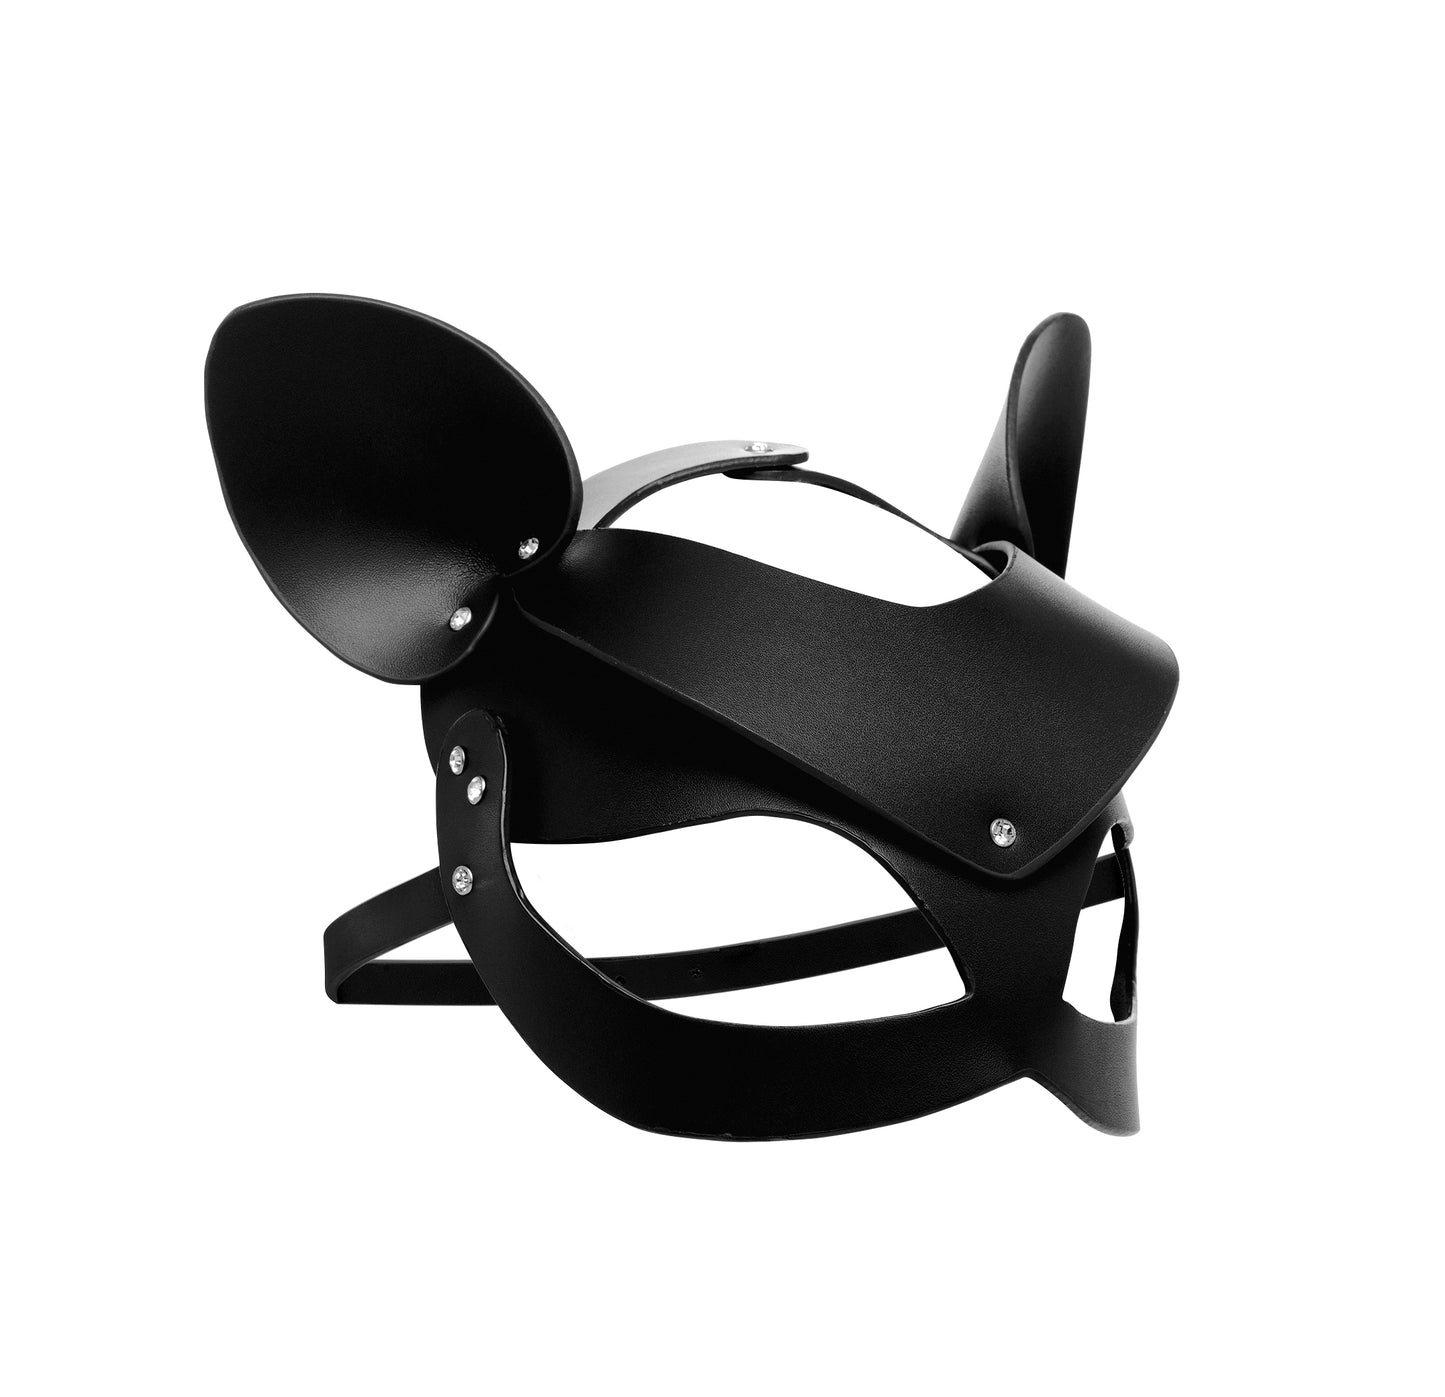 Bad Kitten Leather Cat Mask - Just for you desires